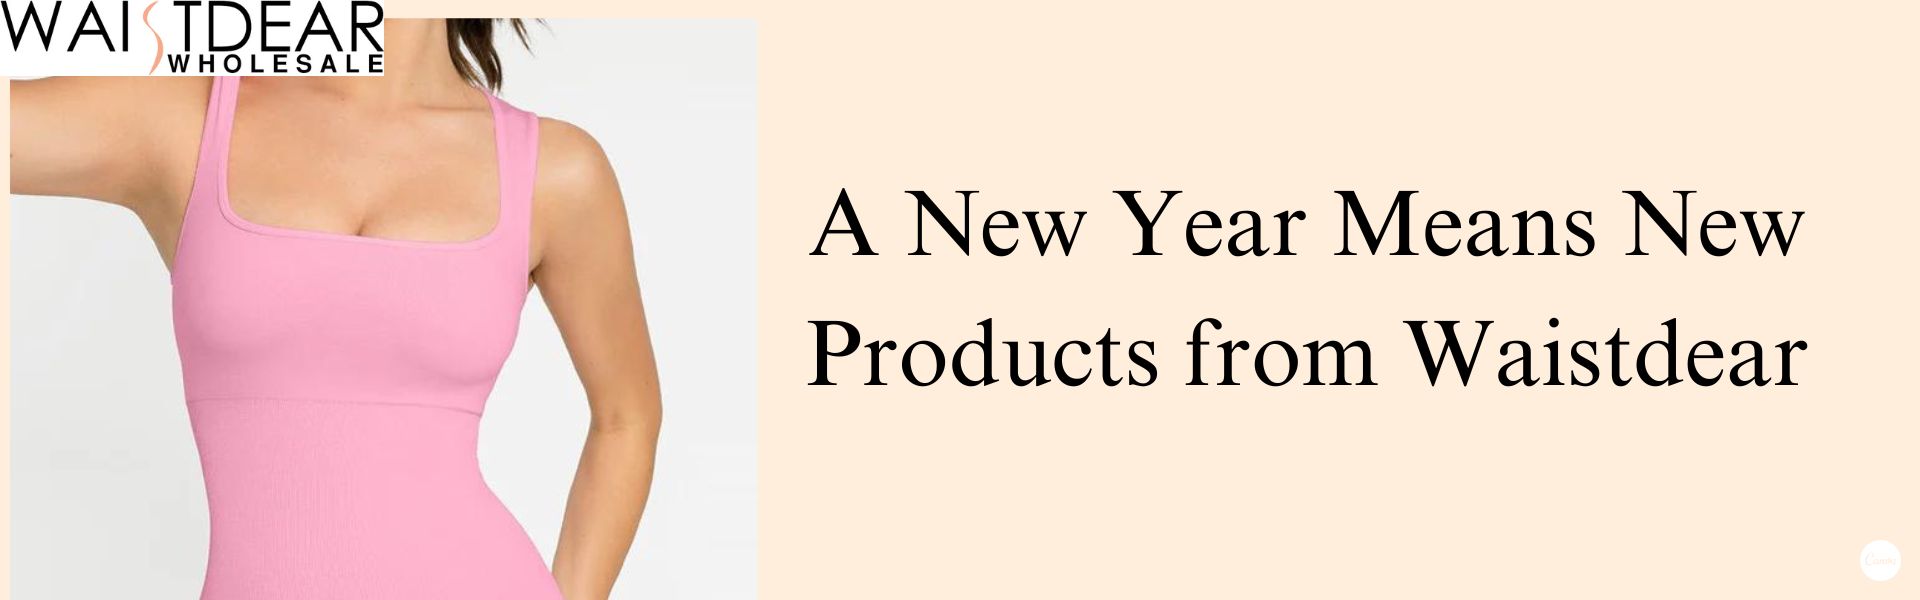 A New Year Means New Products from Waistdear